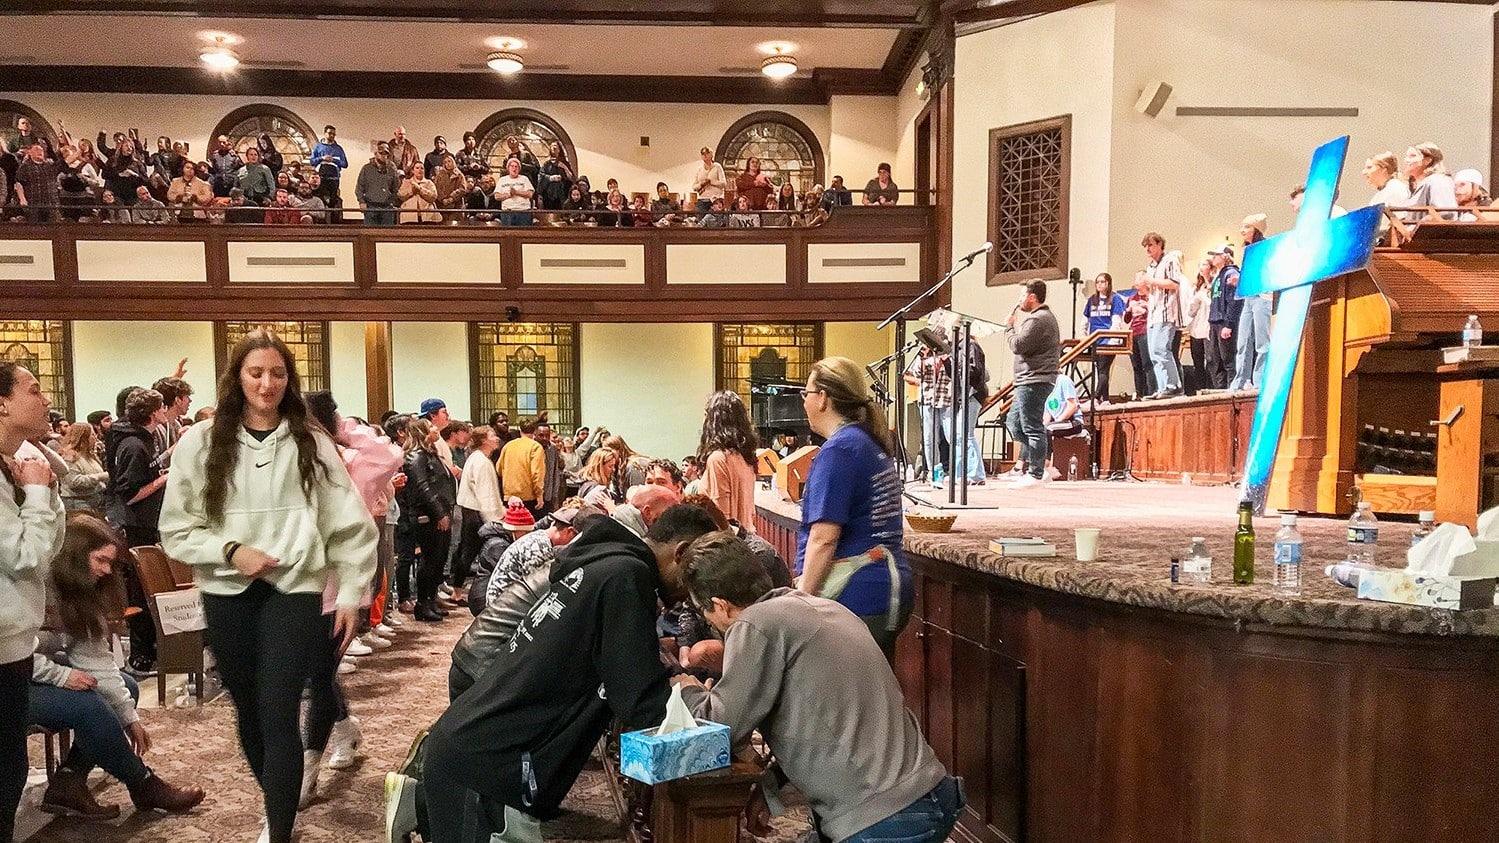 Citing Disruptions, Asbury Authorities Move to End 13 Days of Revival